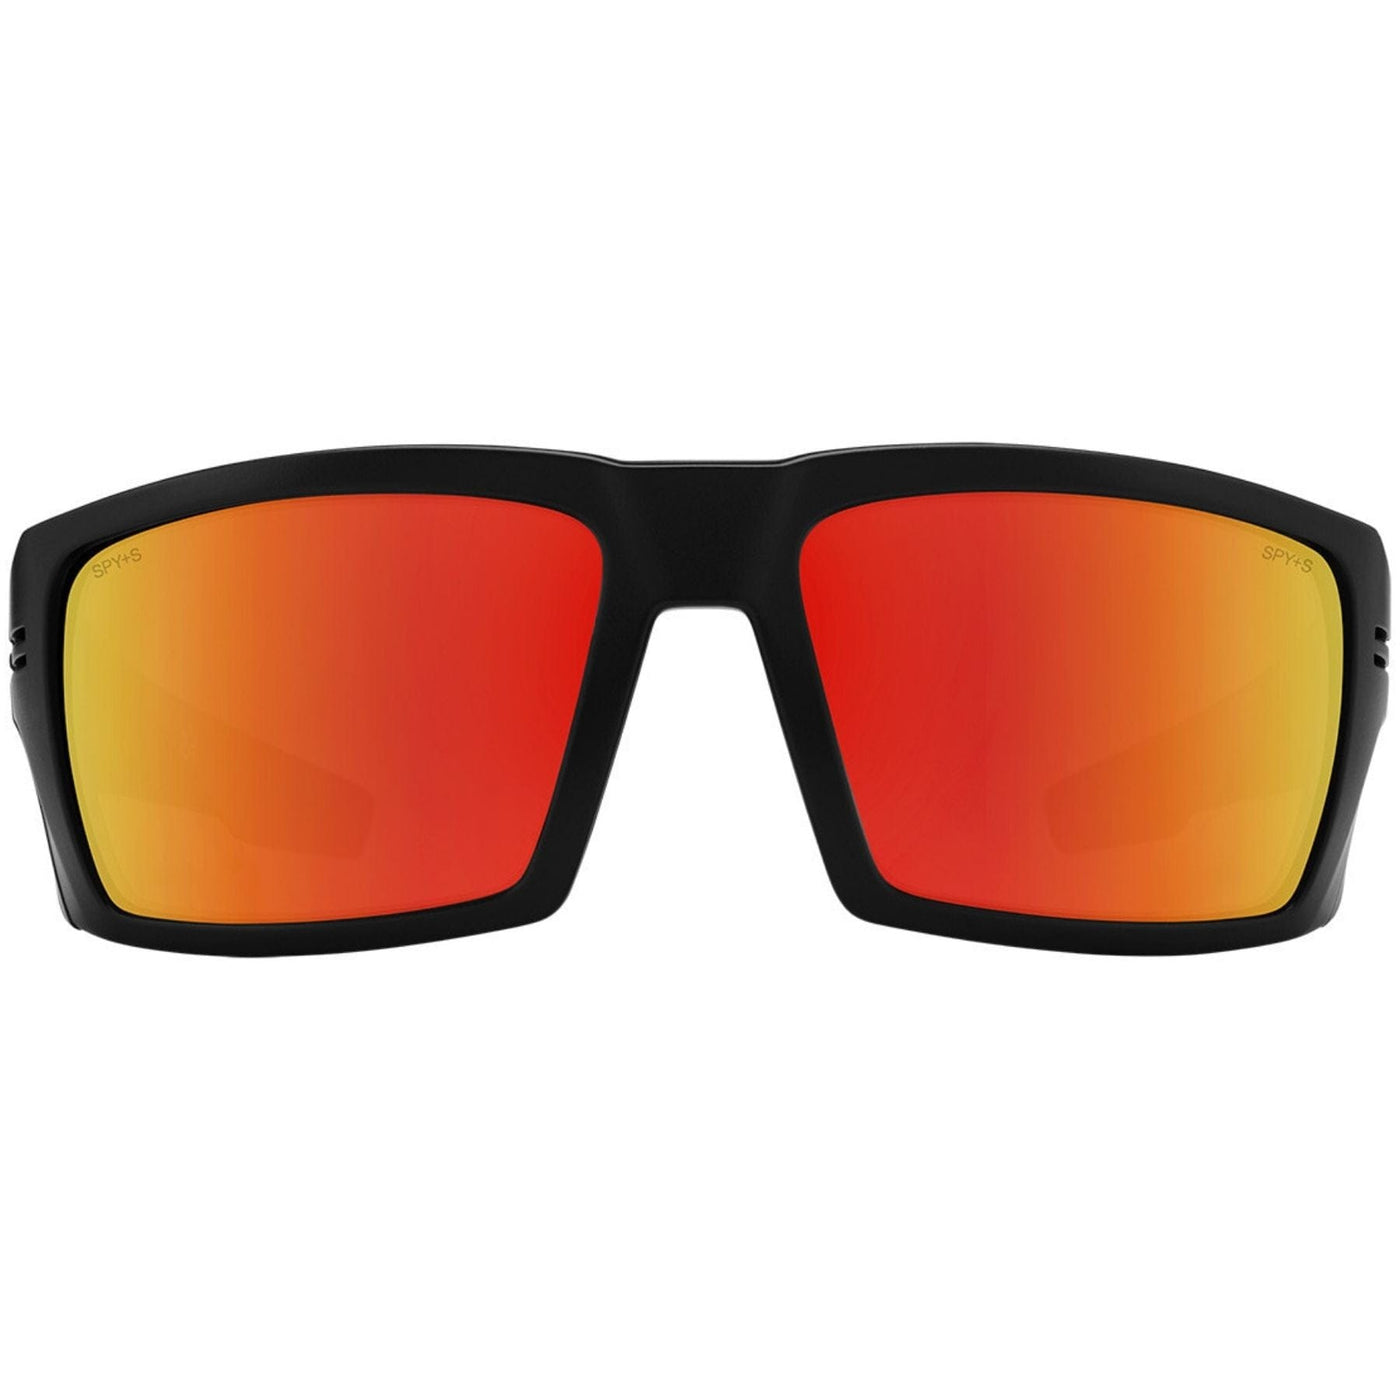 red polarized sunglasses for fishing